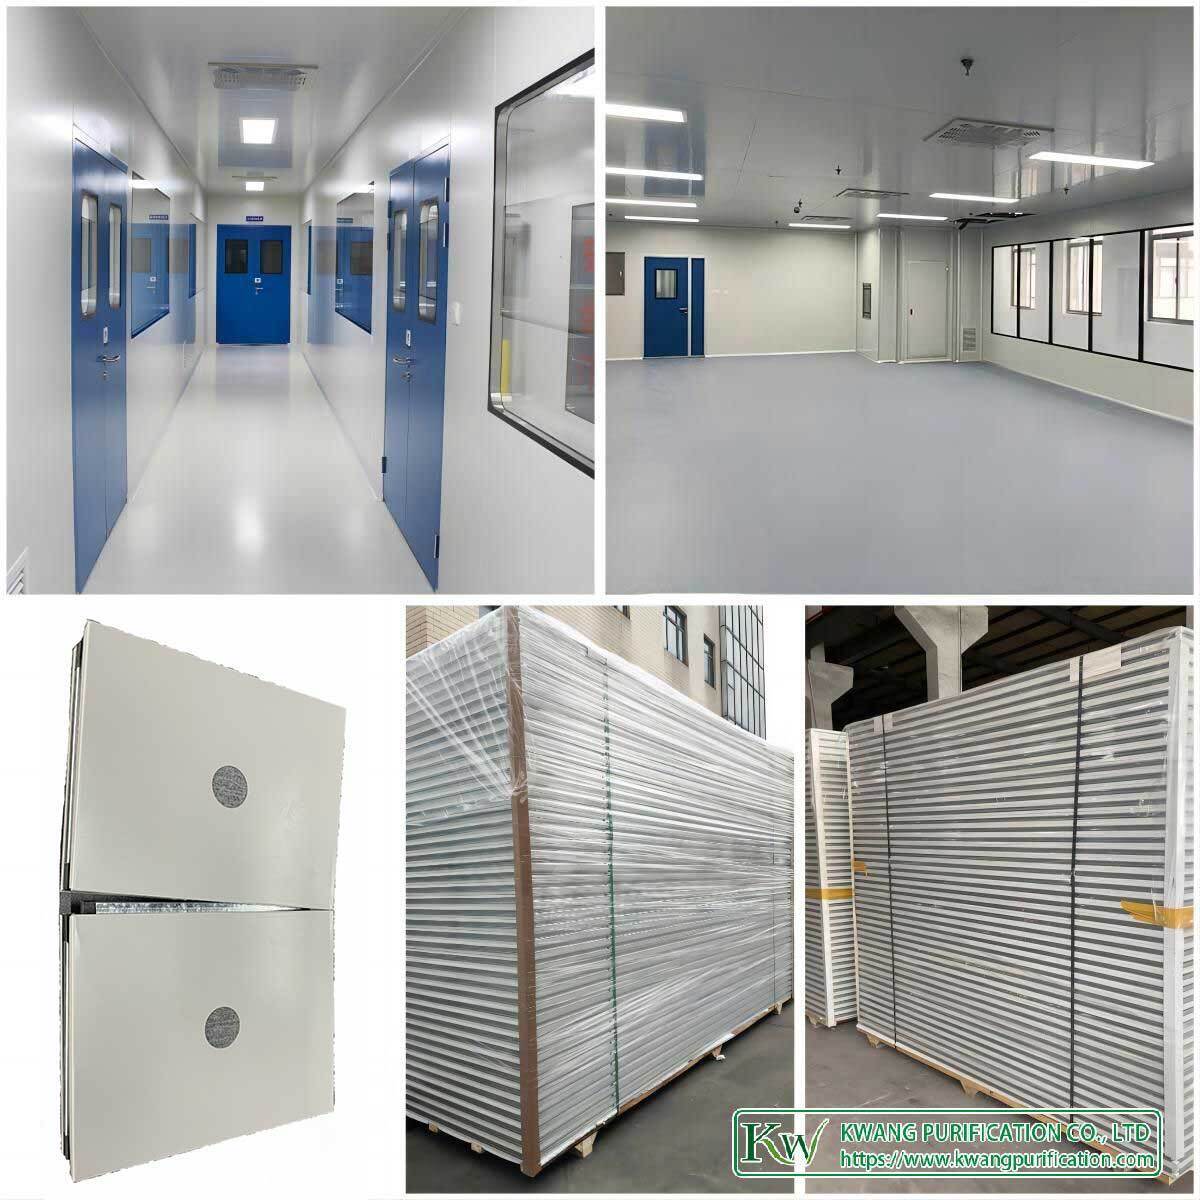 Cleanroom Wall Panels System: Creating Controlled Environments with Optimal Contamination Control